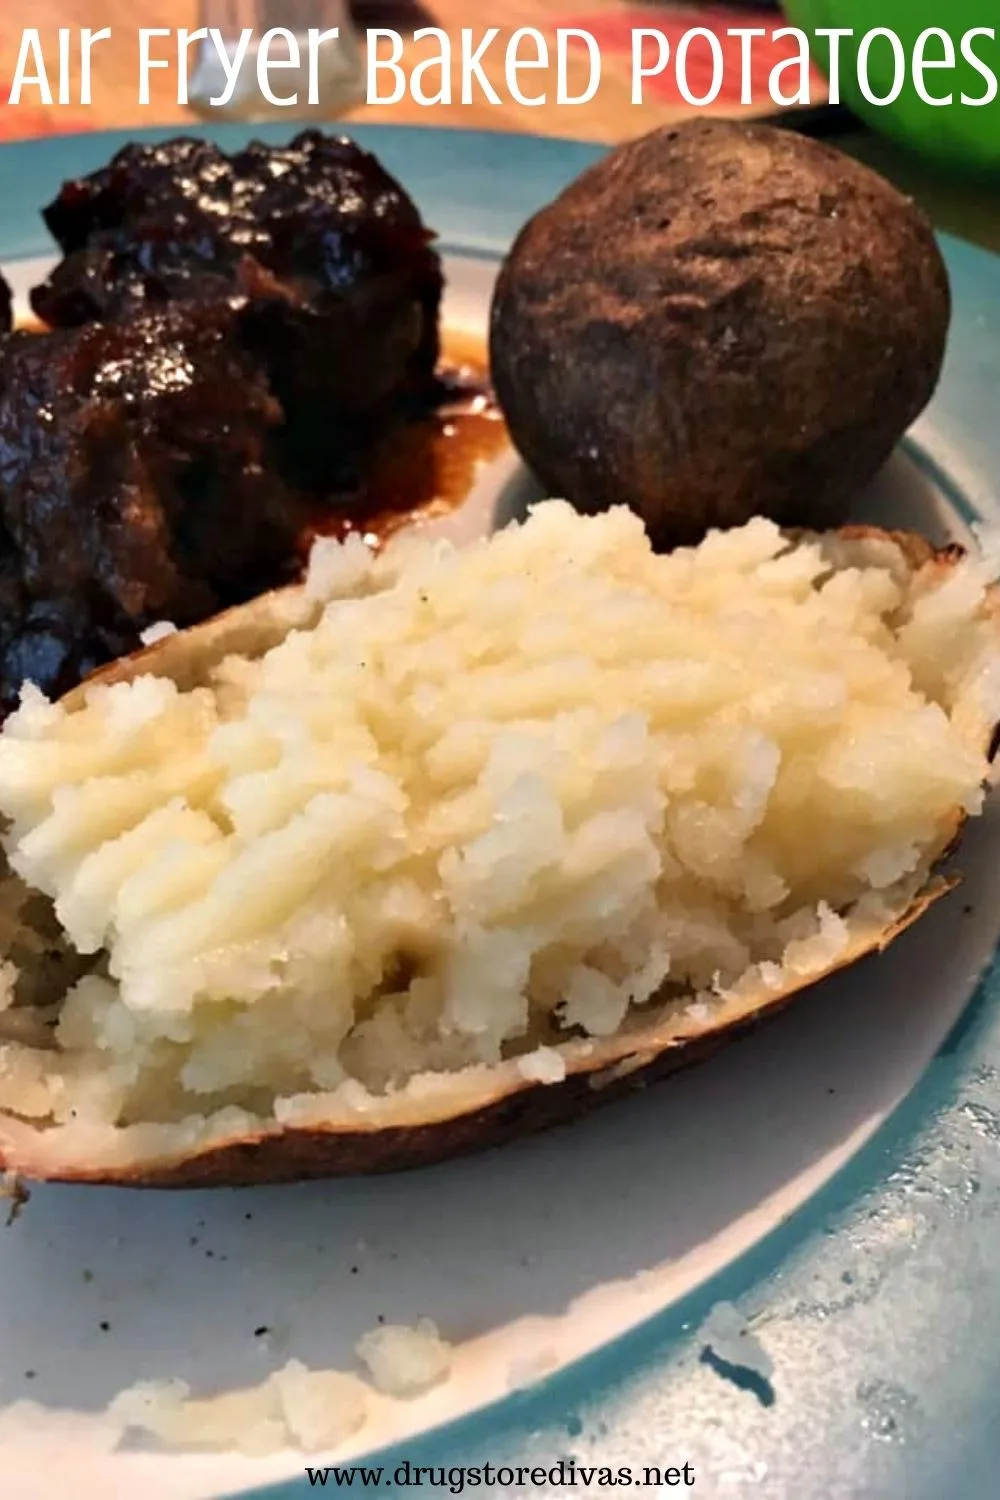 Baked Potatoes are so easy to make in the air fryer. This Air Fryer Baked Potatoes recipe is only 30 minutes! Get it on www.drugstoredivas.net.